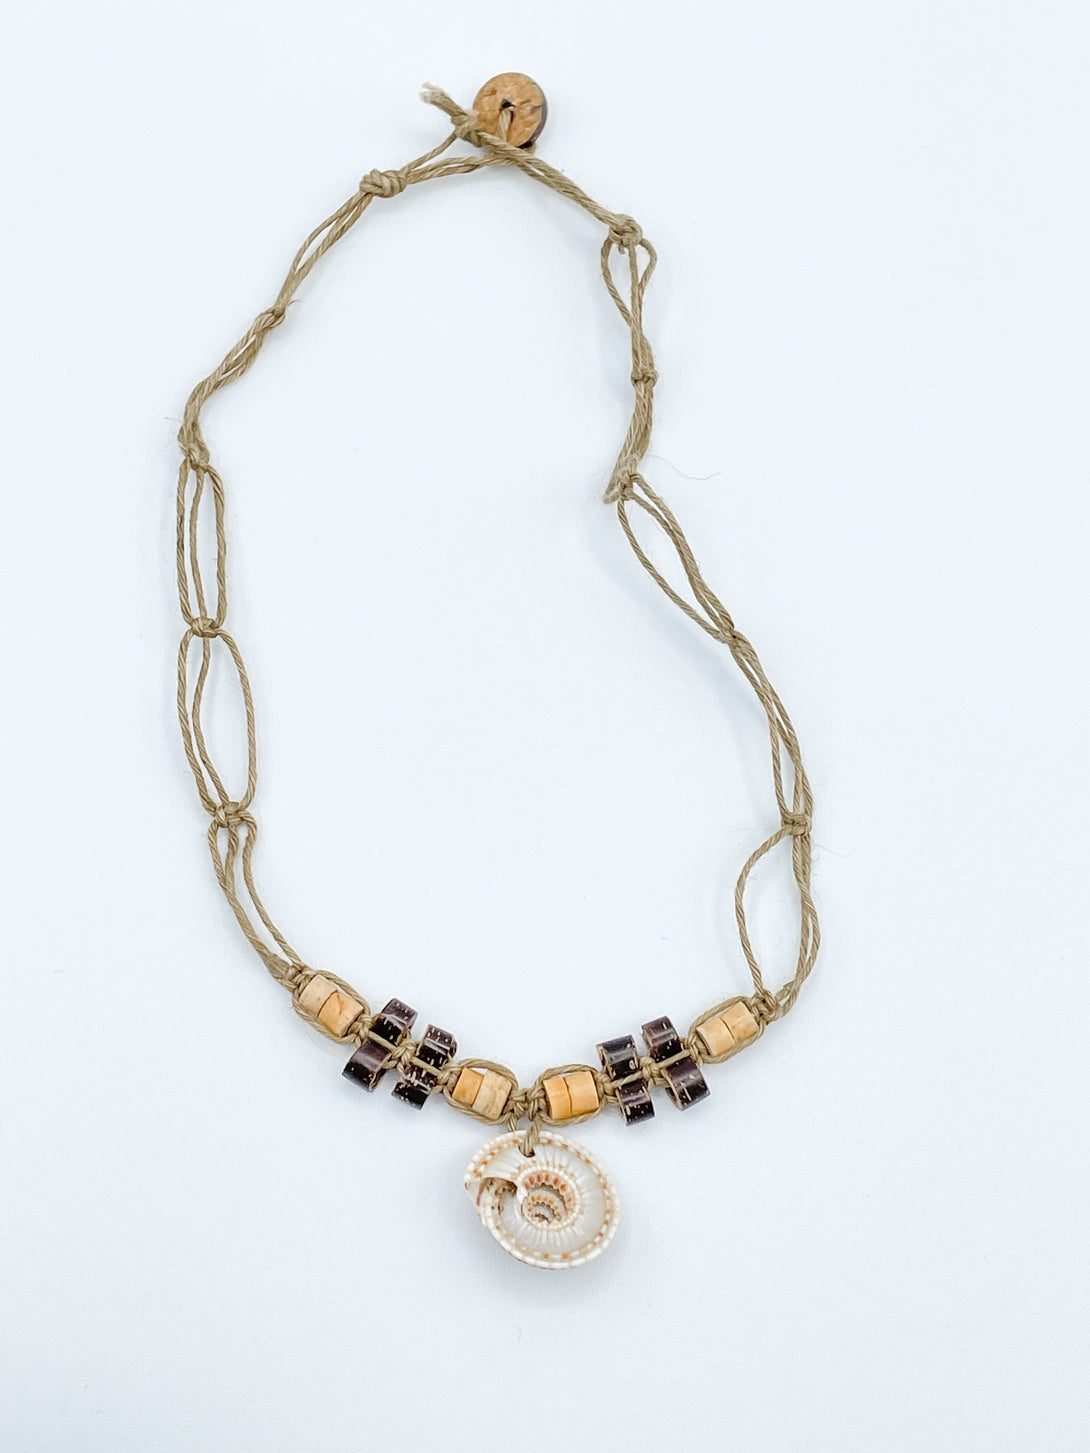 Buch + Deichmann Vintage Necklace with Sundial Shell